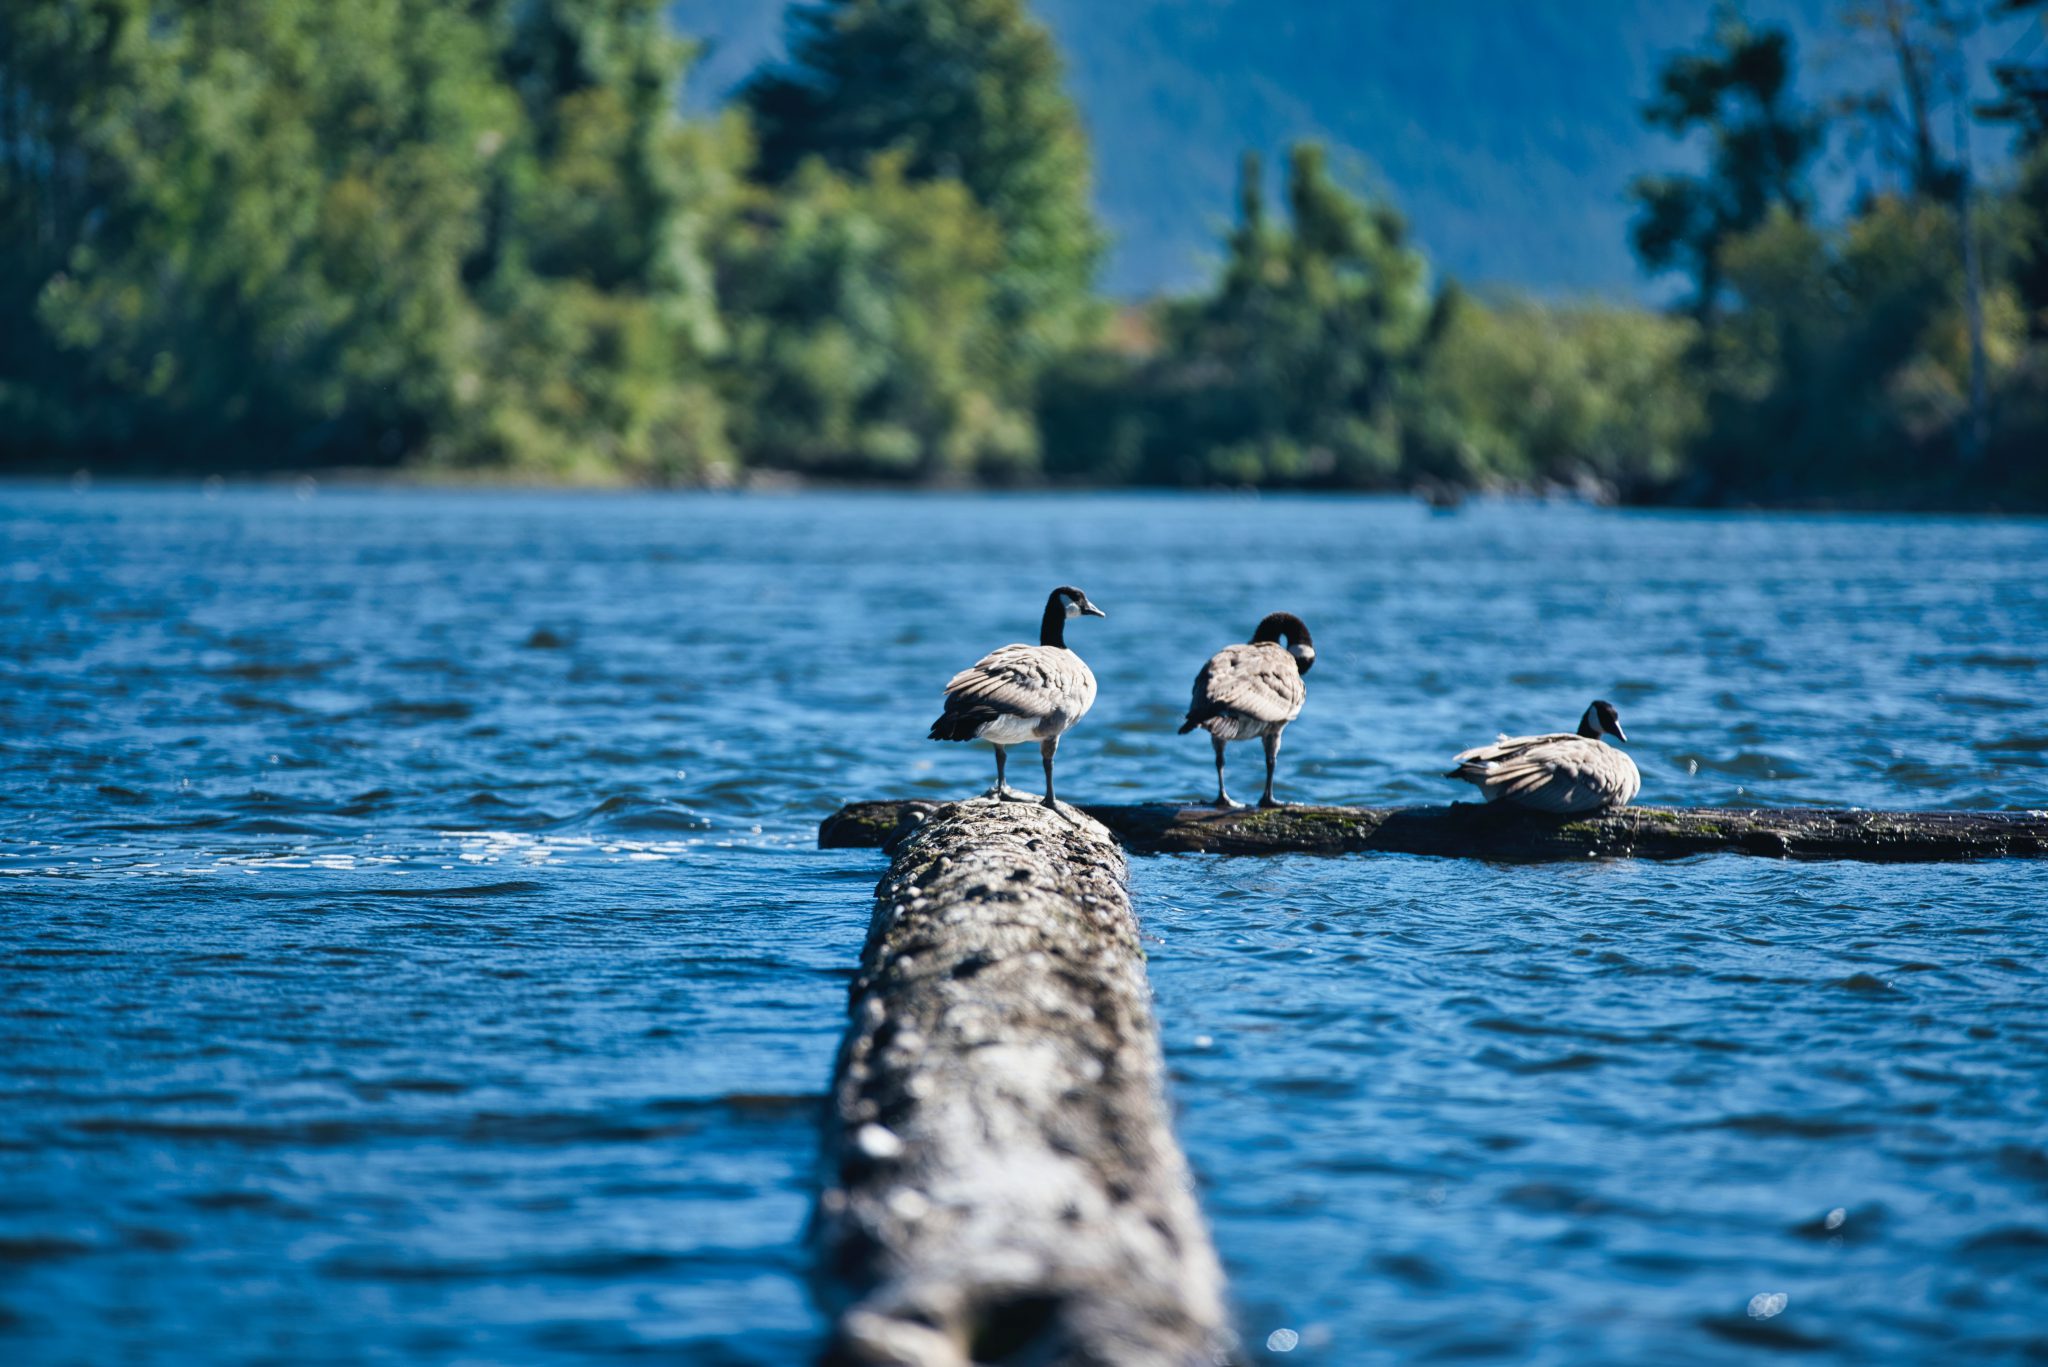 Geese sitting along a lake structure - geese can be a source of the parasite that causes Swimmer's Itch